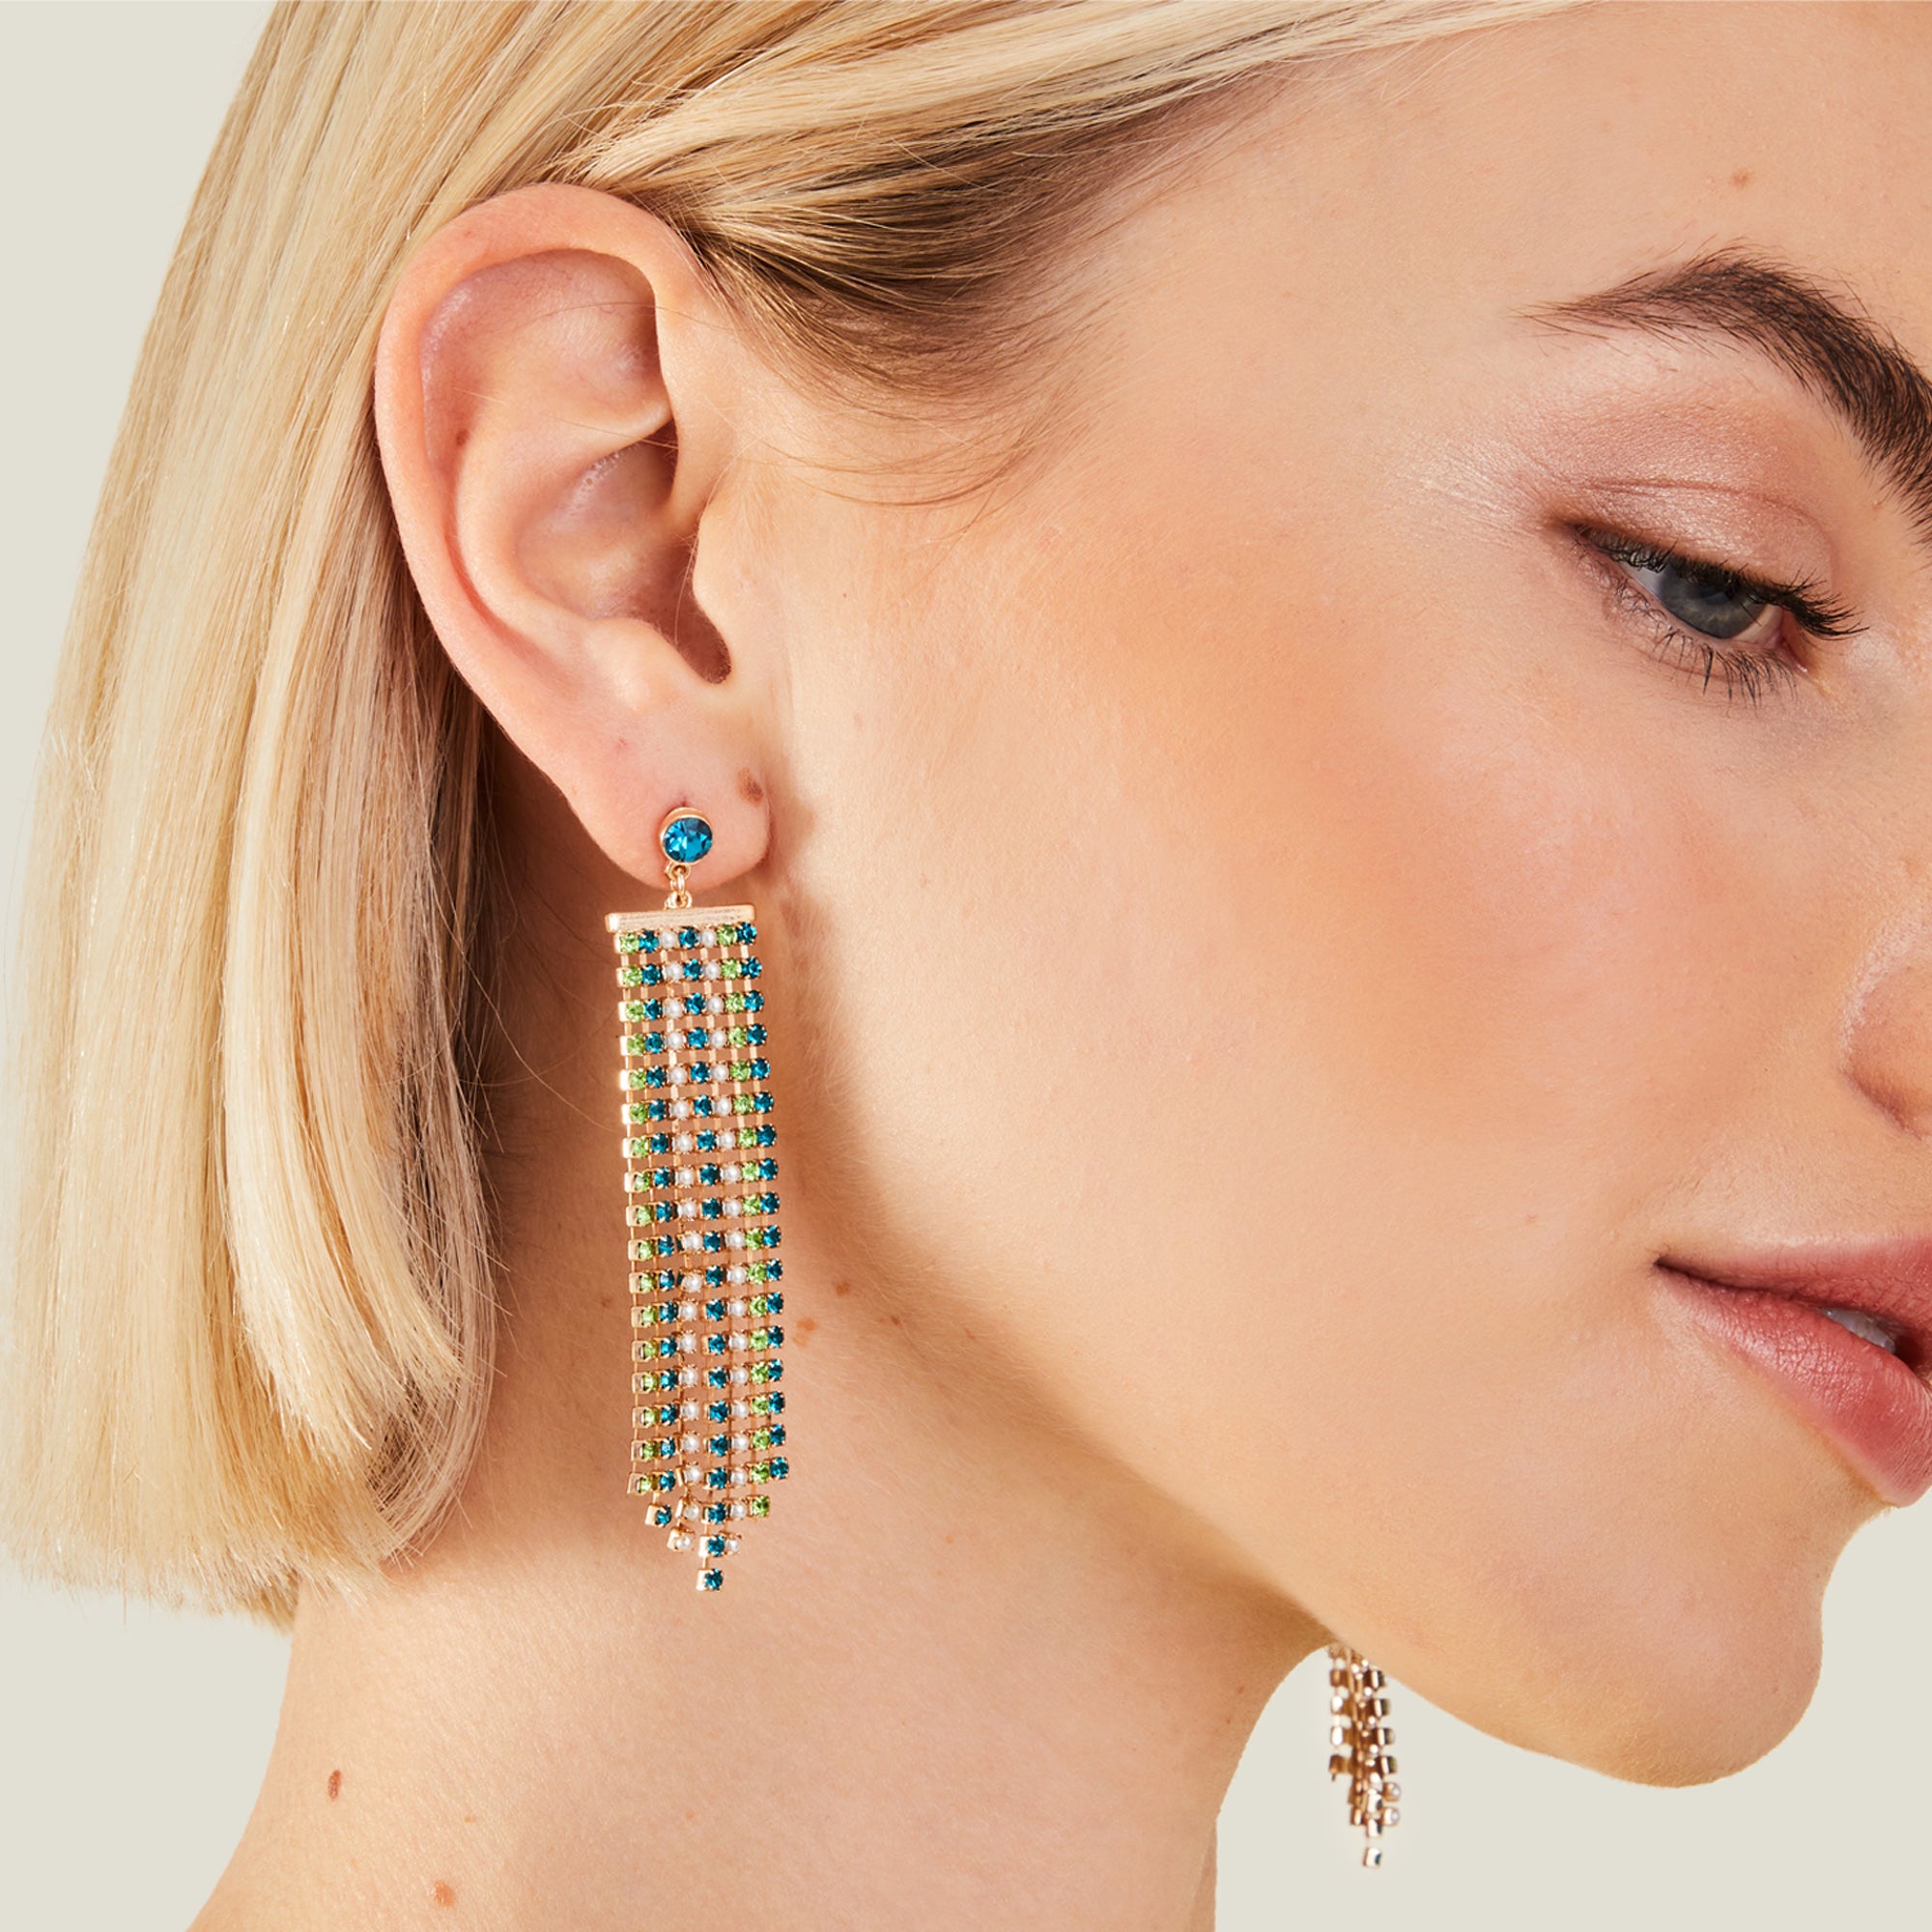 6 DIFFERENT TYPES OF EARRINGS EVERY WOMAN SHOULD HAVE